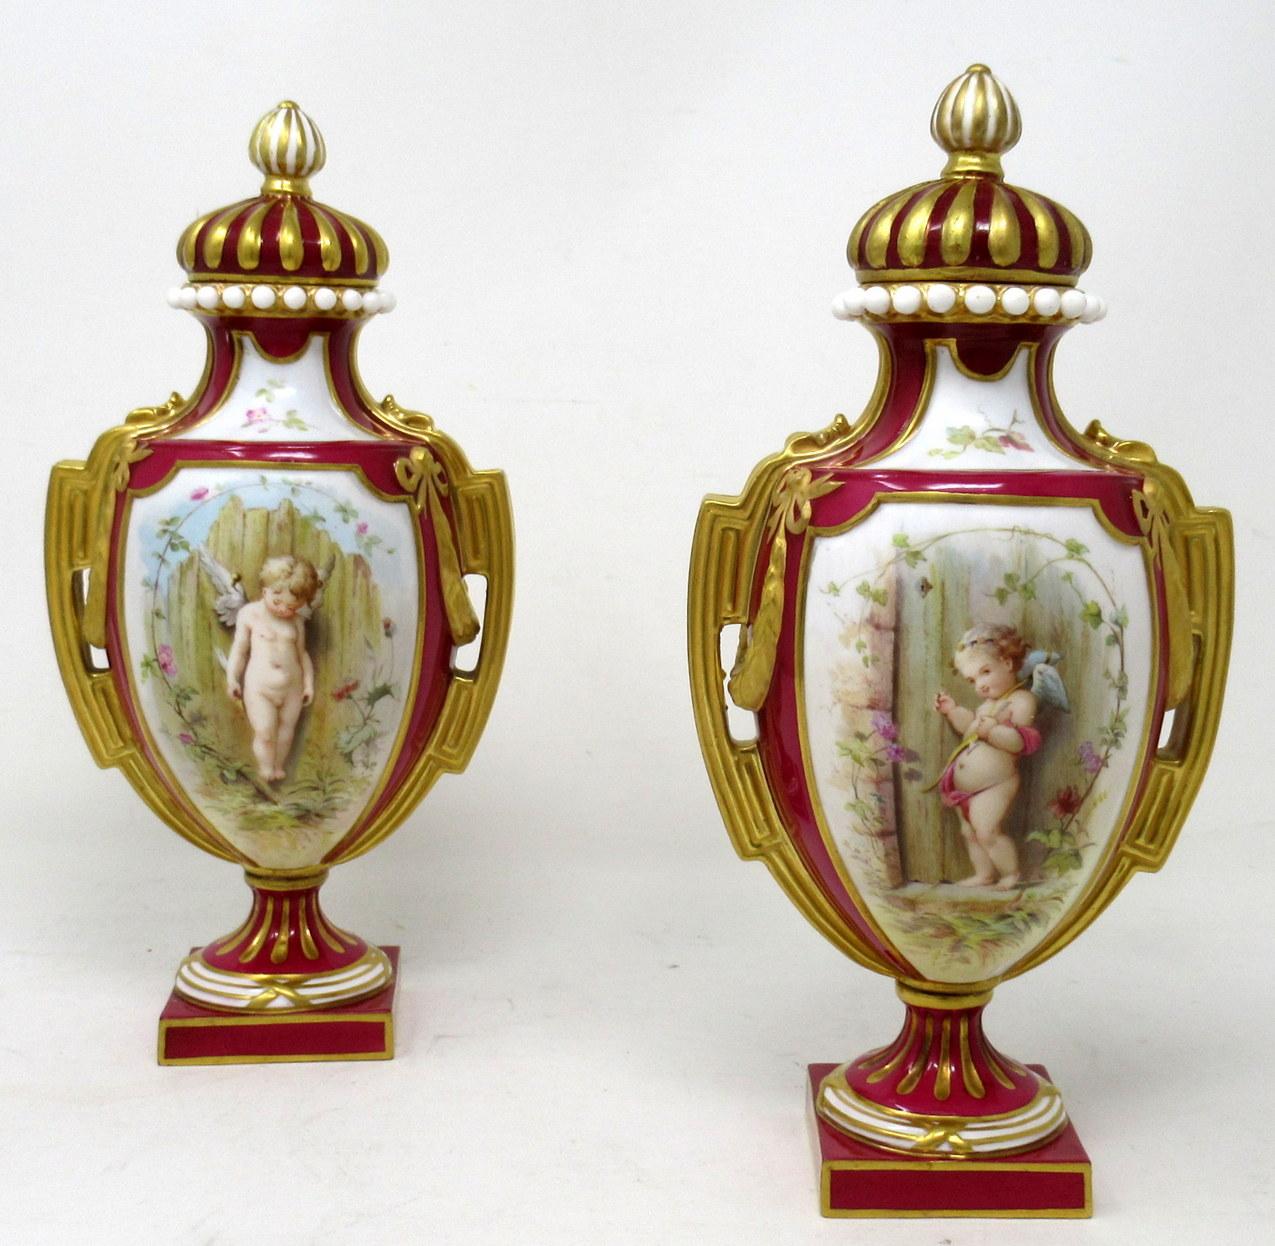 An exceptionally fine examples of a Pair of Crown Derby lidded Vases or Urns of medium proportions and museum quality, complete with original lobed finial covers, exquisitely painted by renowned porcelain Artist Antonin Boullemier, last quarter of